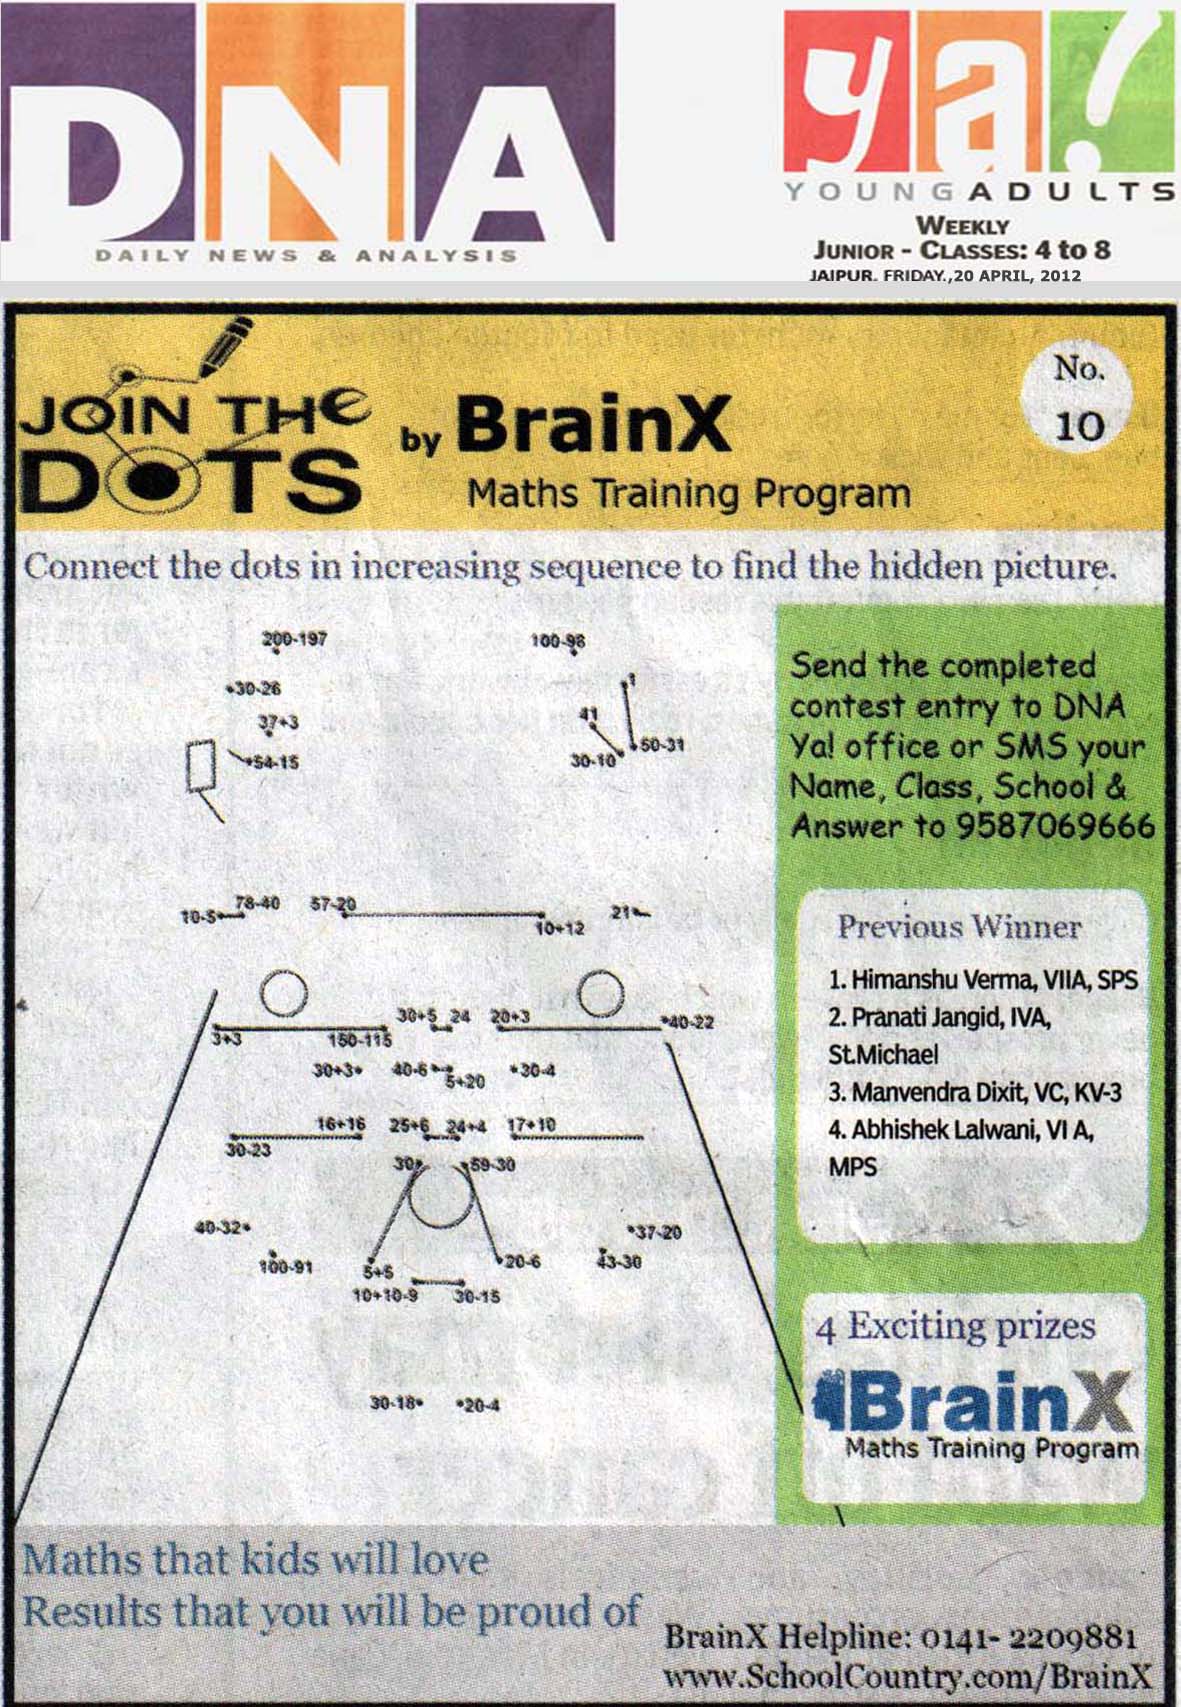 Number Singh Contest by BrainX Math Training Program published in DNA Ya! on 20-04-2012.